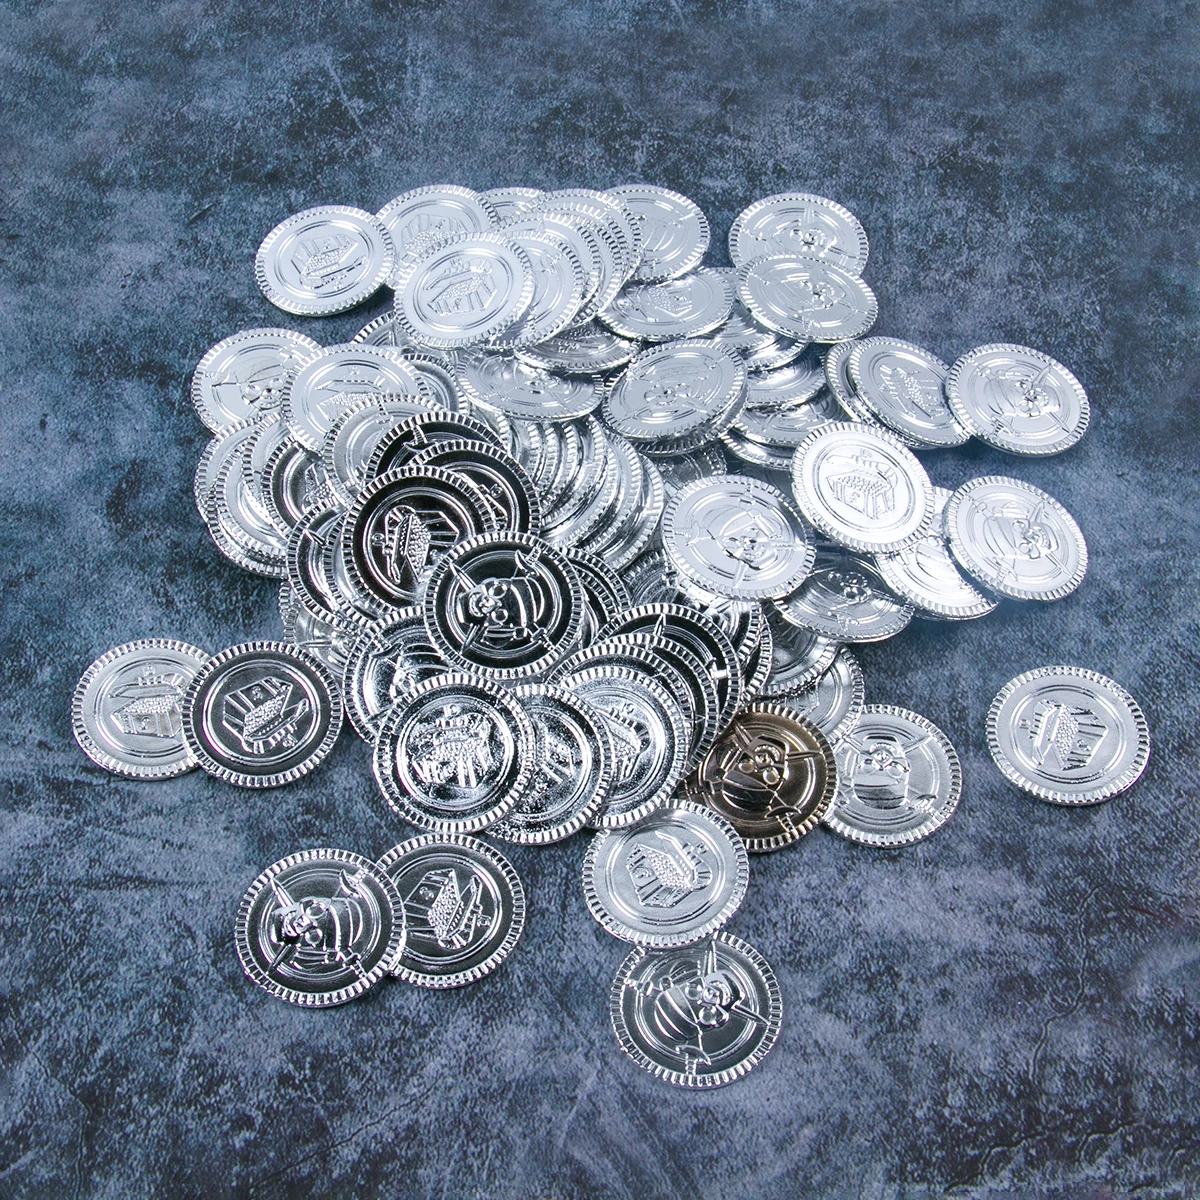 

20Pcs Halloween Theme Props Plastic Silver Coins Treasure Game Coin Kids Birthday Halloween Party Pirate Game Decorations